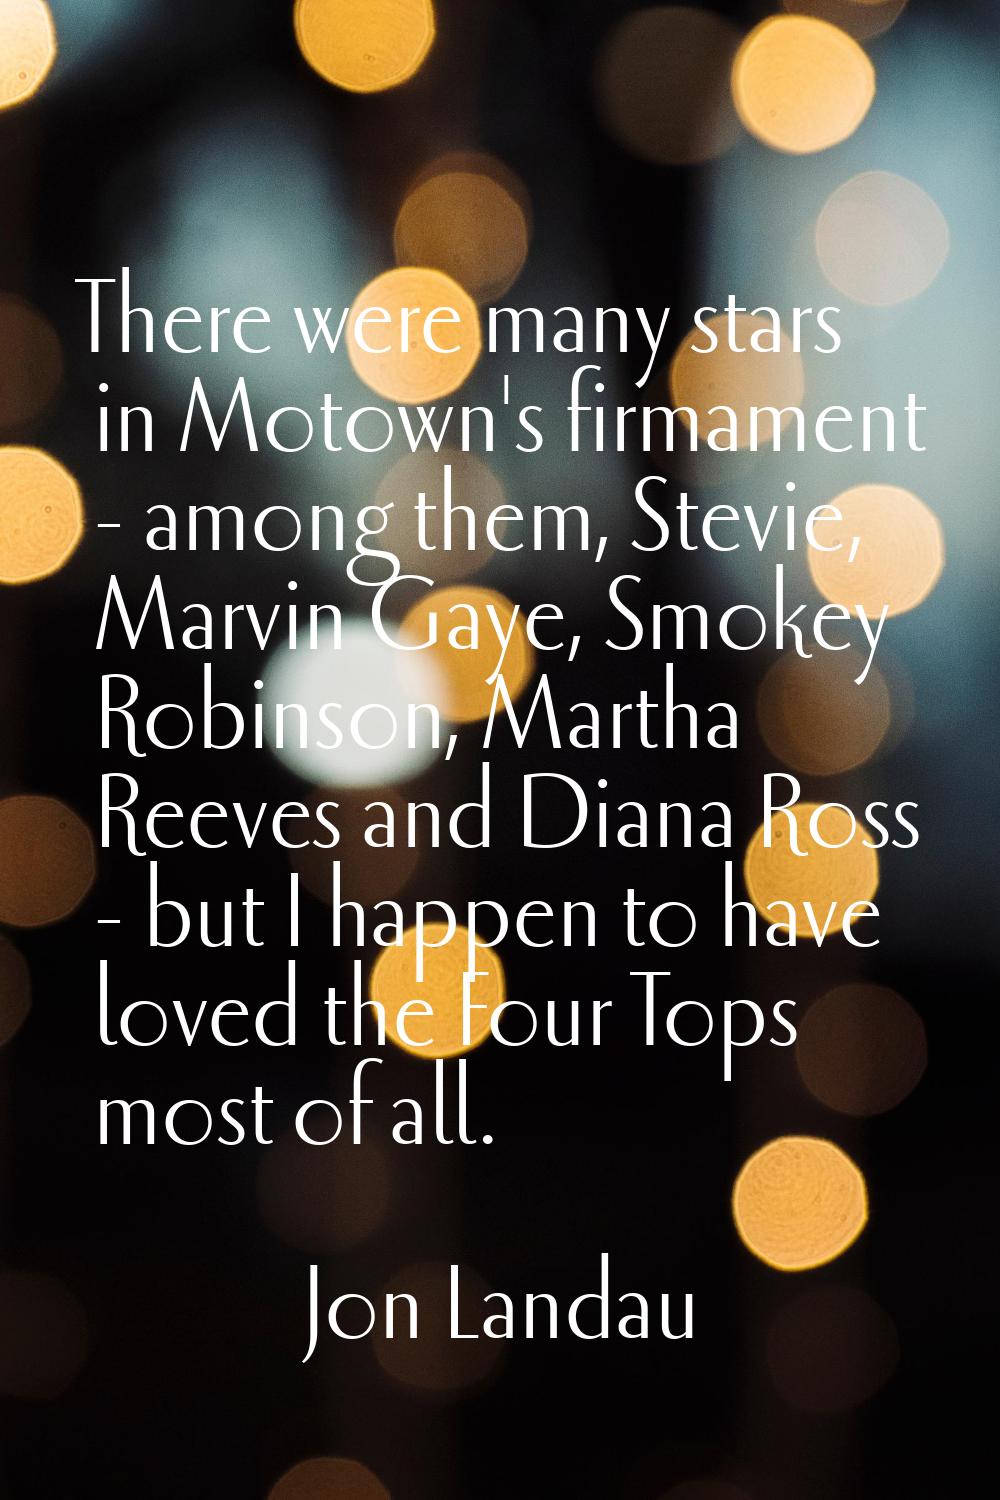 There were many stars in Motown's firmament - among them, Stevie, Marvin Gaye, Smokey Robinson, Mar